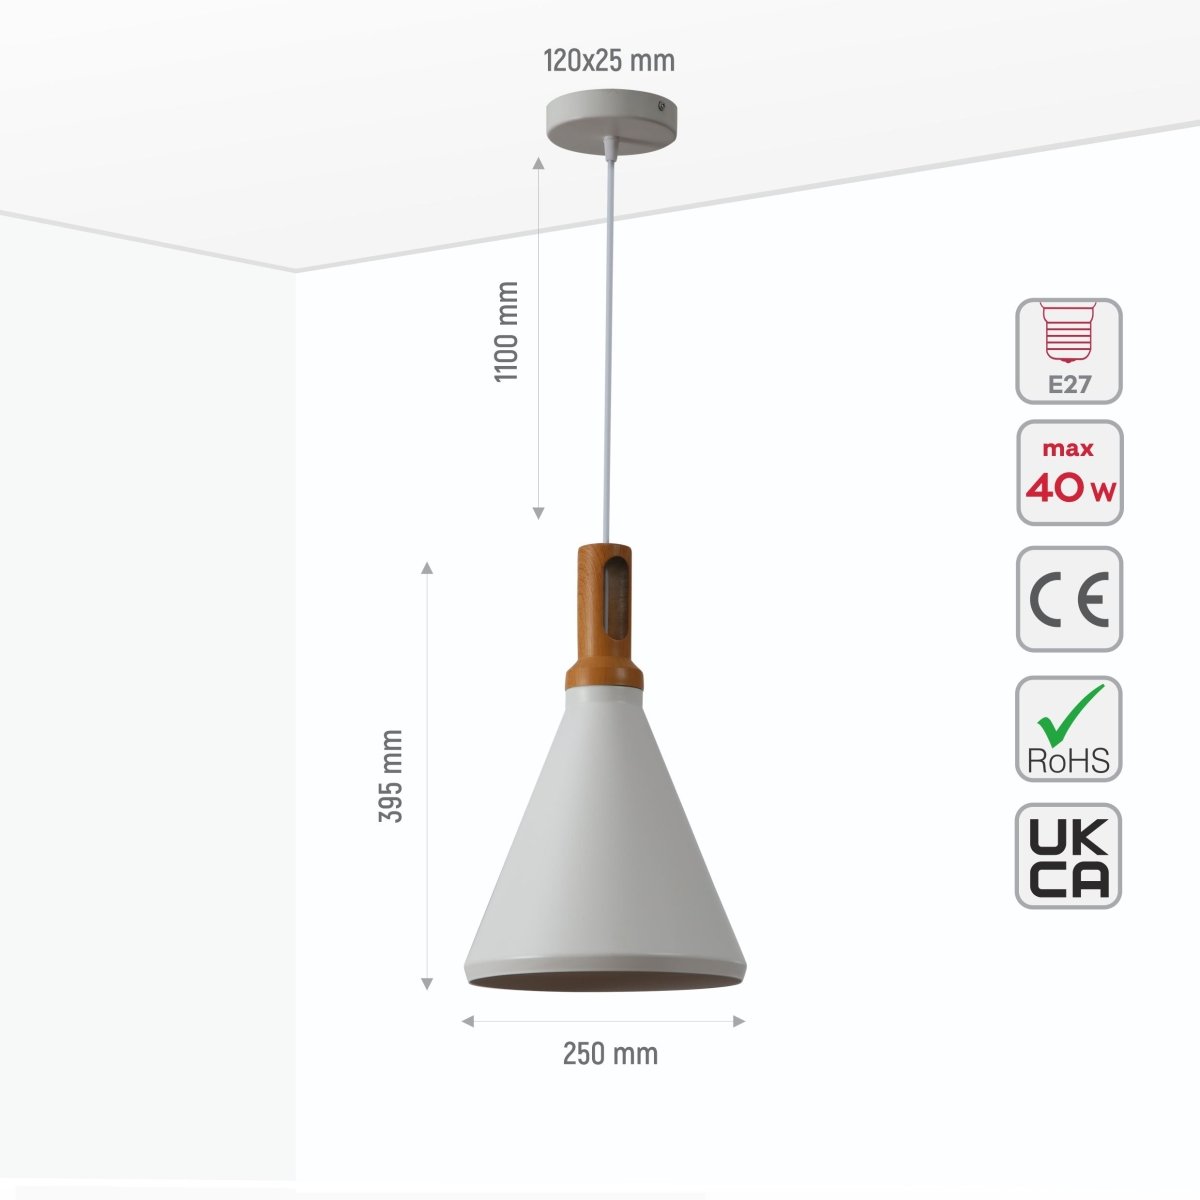 Product dimensions of white metal wood neck pendant light small e27 150-18033